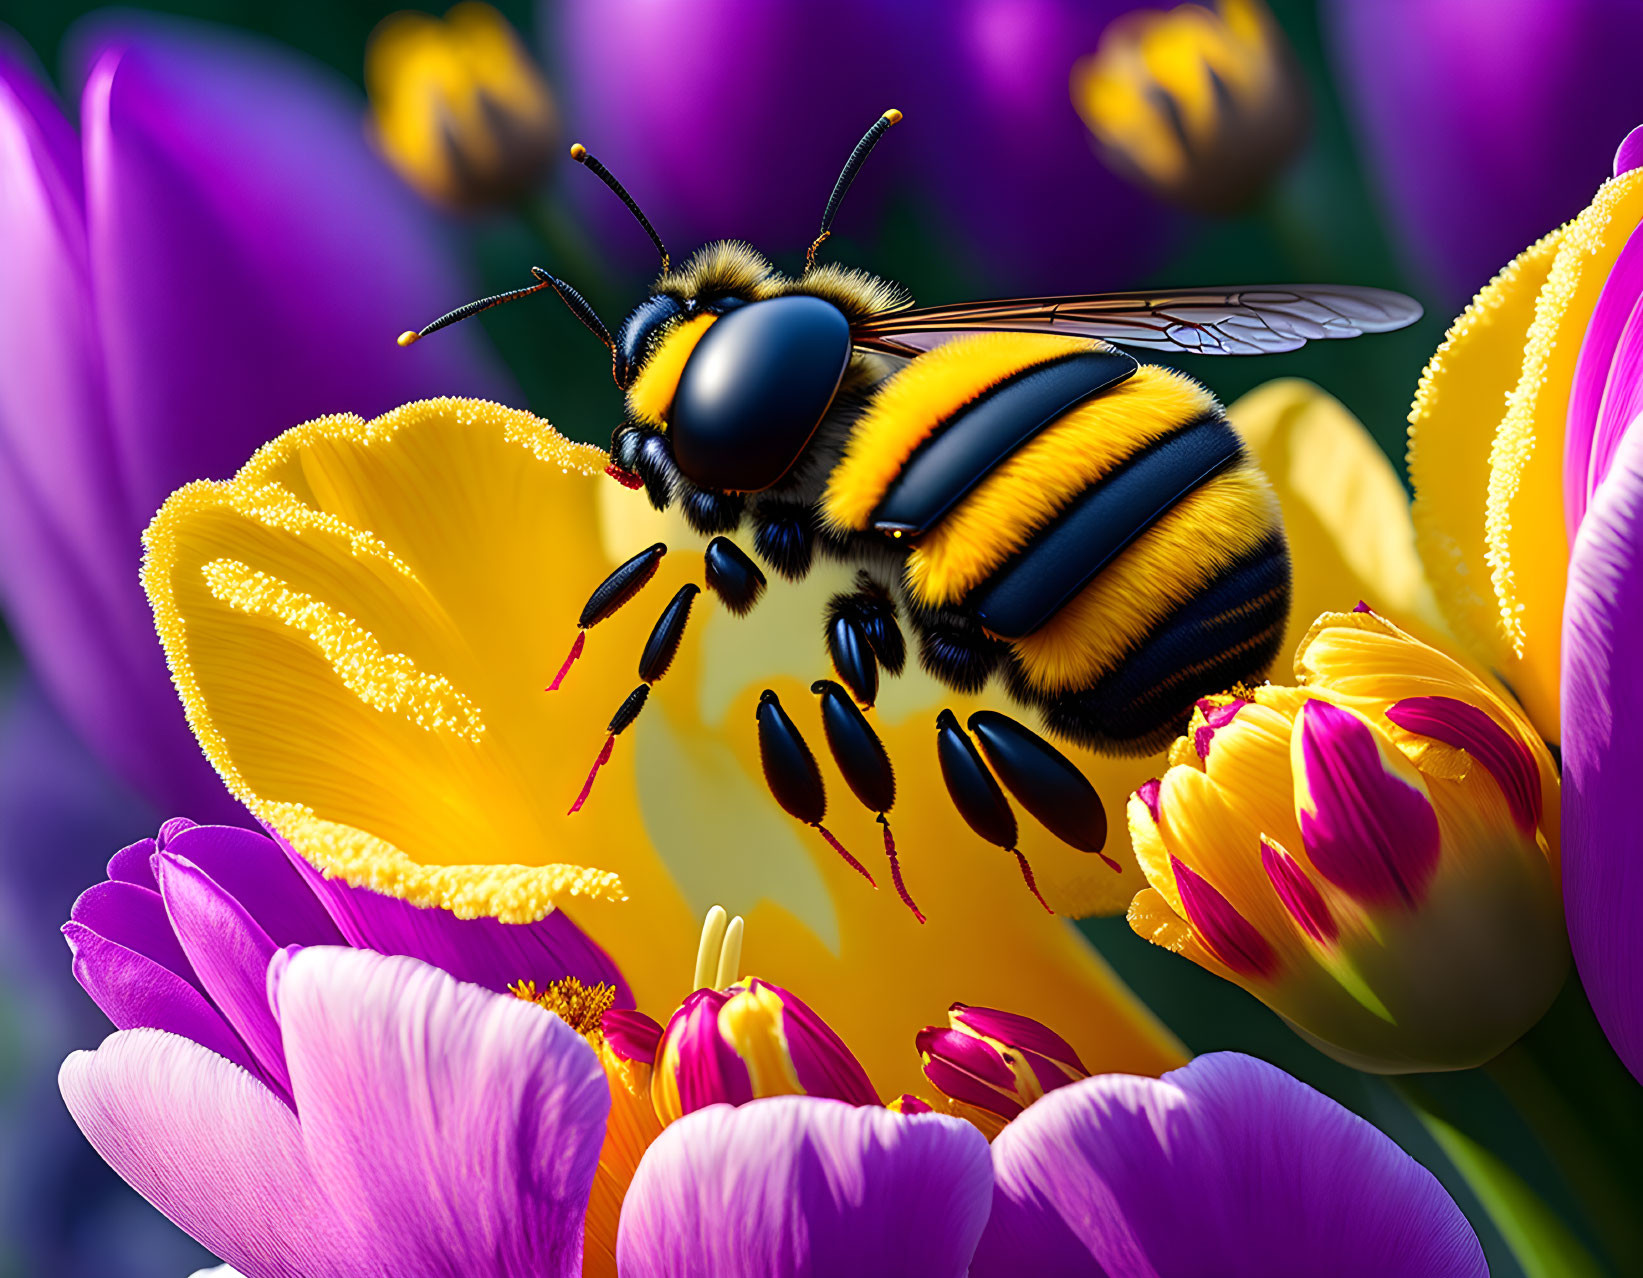 Colorful Bee Pollinating Yellow Tulip with Purple Flowers